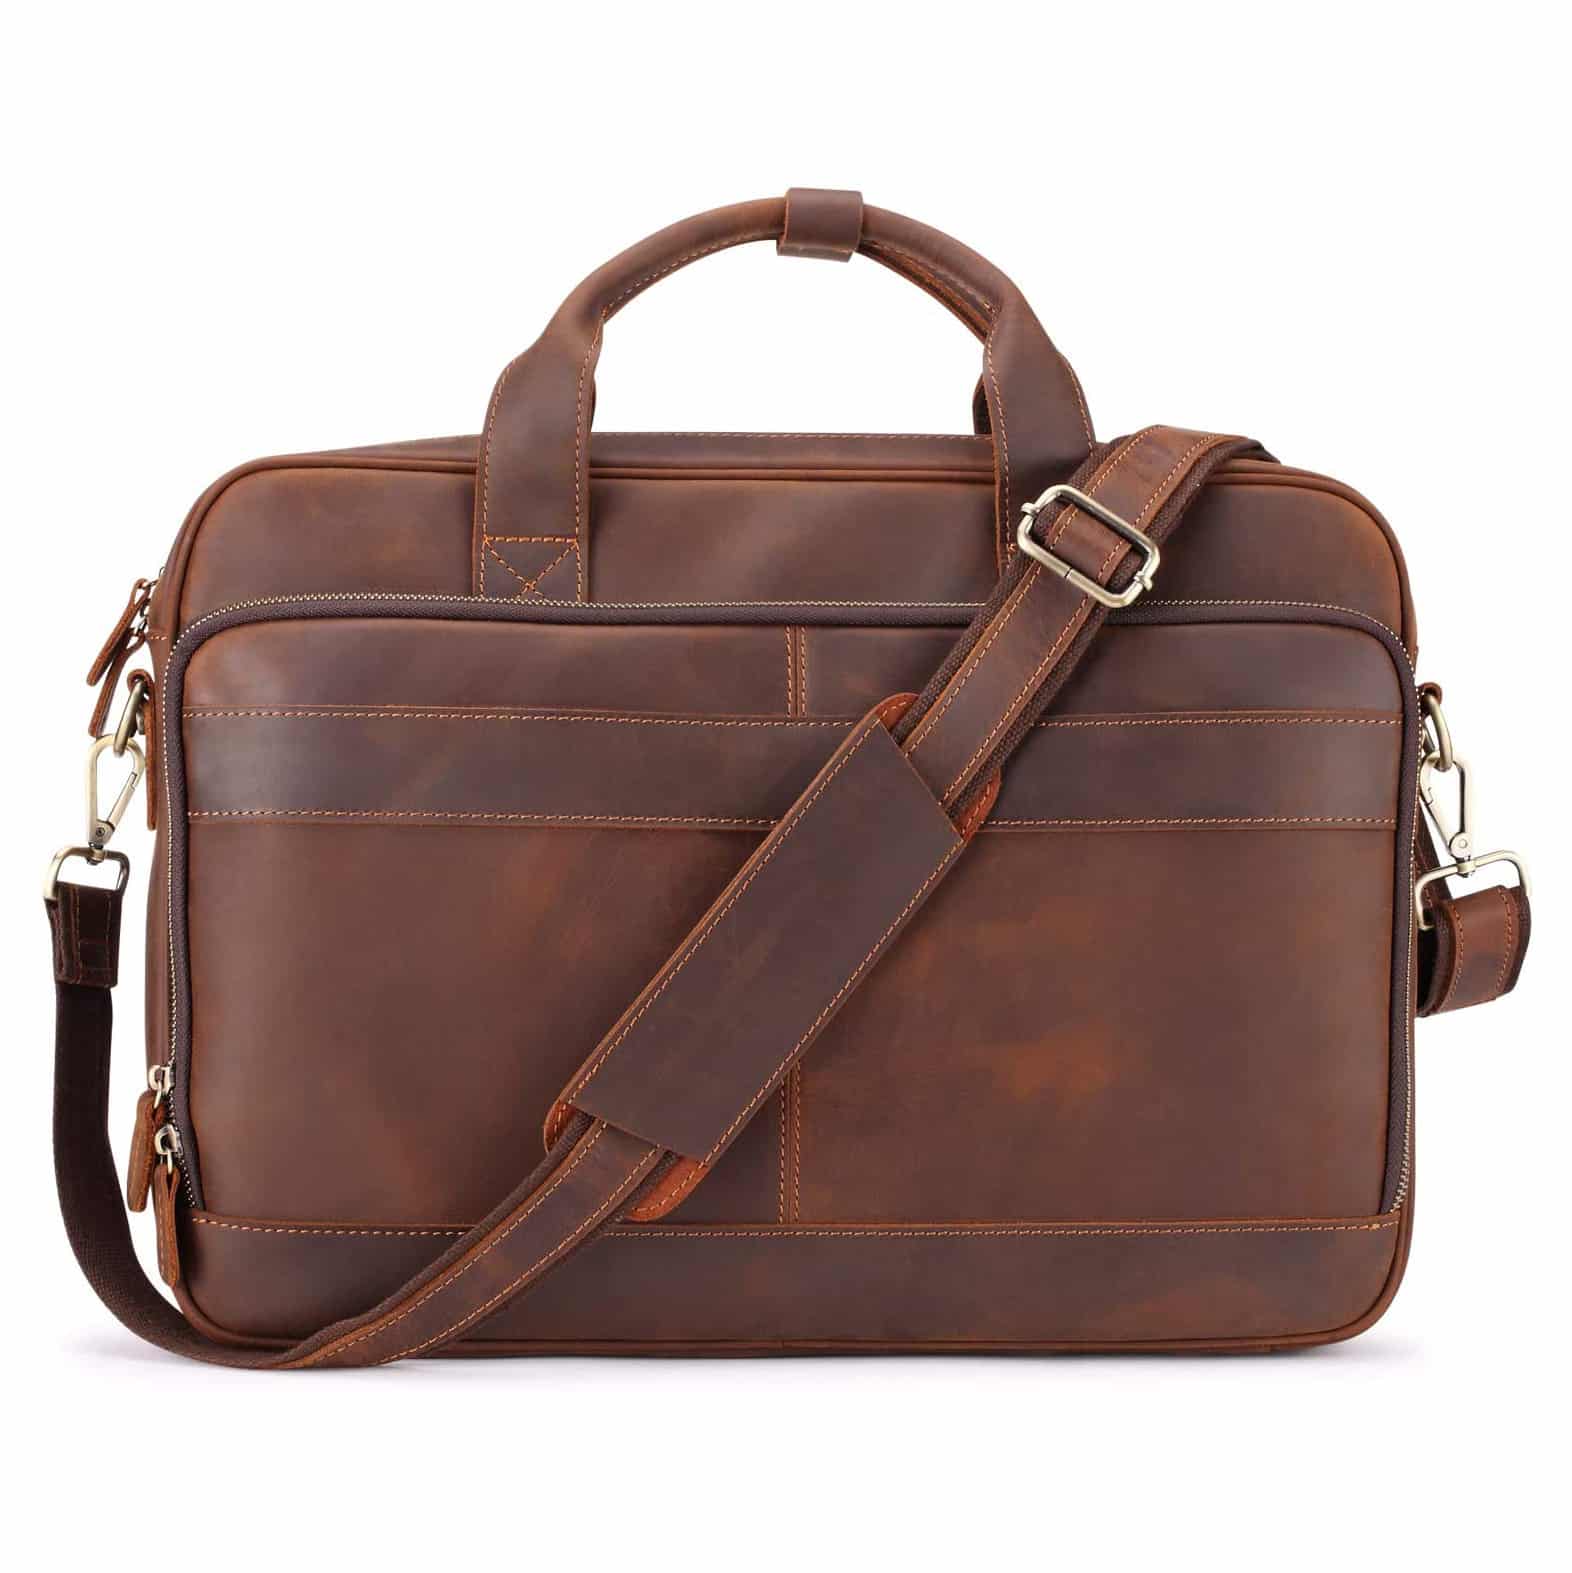 Top 10 Best Leather Briefcase For Men in 2022 Reviews | Buyer's Guide